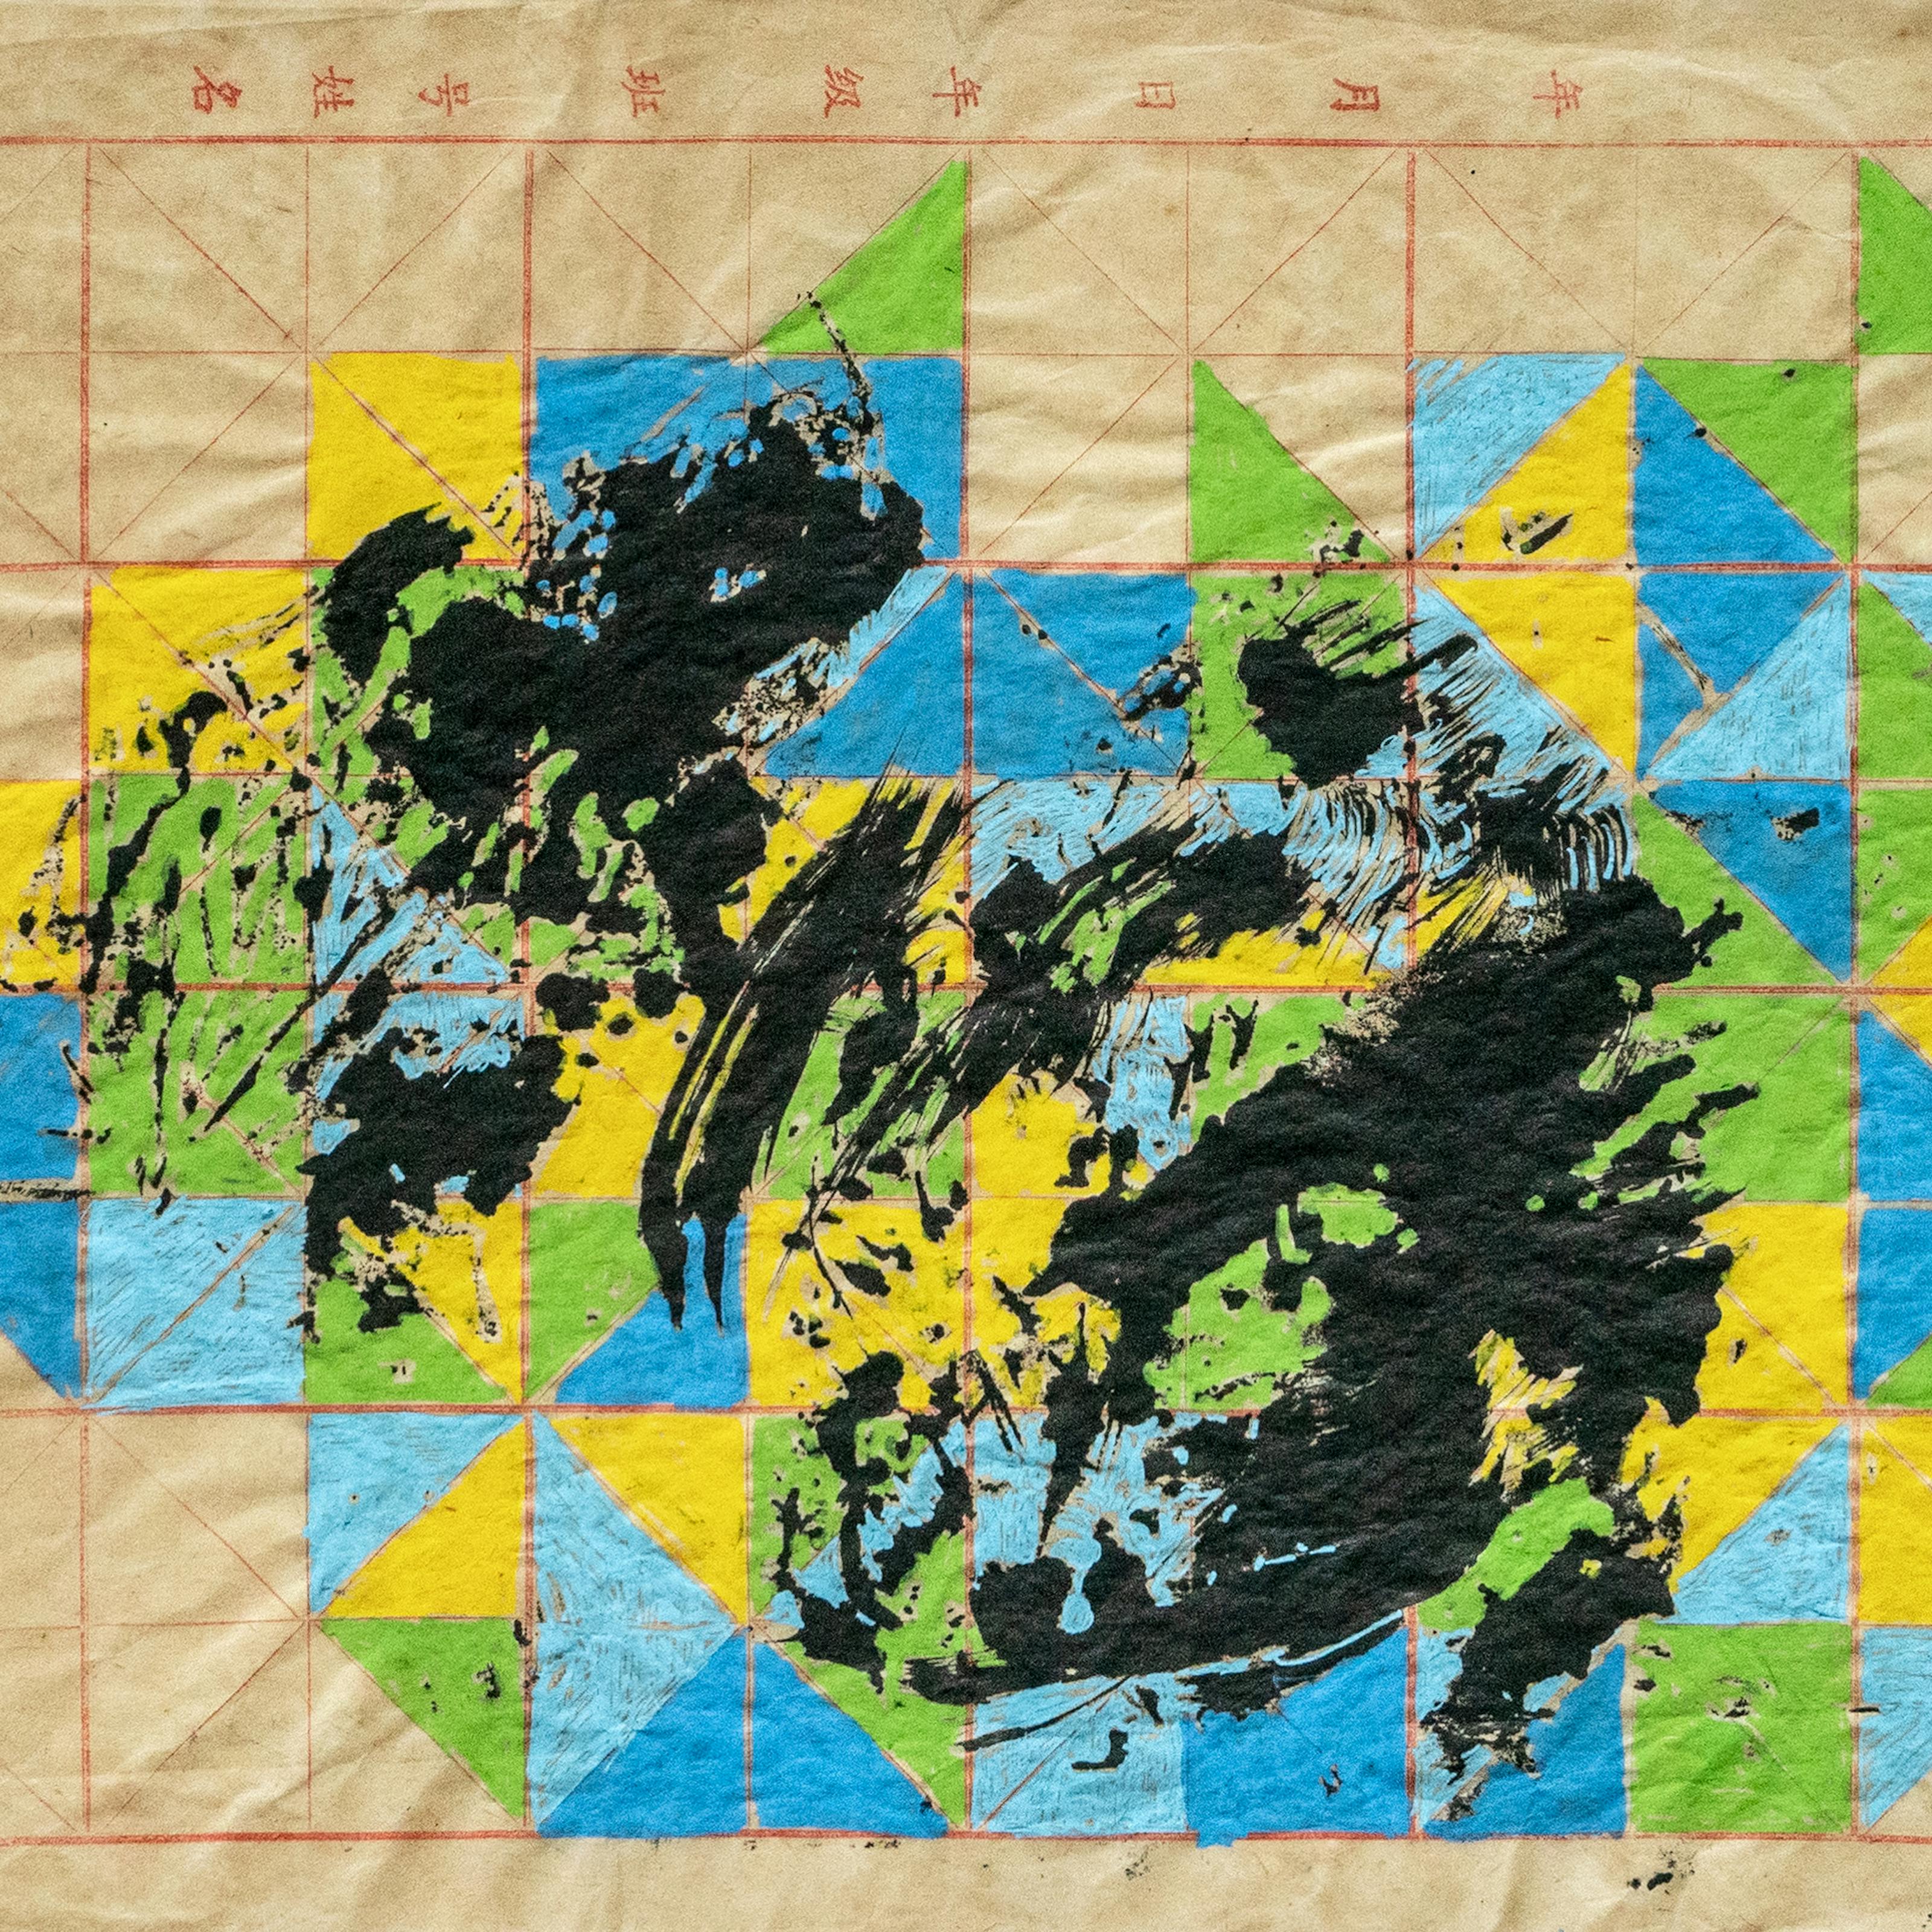 Photograph of an abstract drawing on pink gridded Chinese calligraphy paper that is slightly crumpled and folded. Many of the triangles within the grid are filled in with turquoise, light blue, light green and yellow ink. There is a an abstract mass of black ink in the middle, which shows the traces of the artist's brushstrokes. Above the grid are some small pink Chinese characters. 